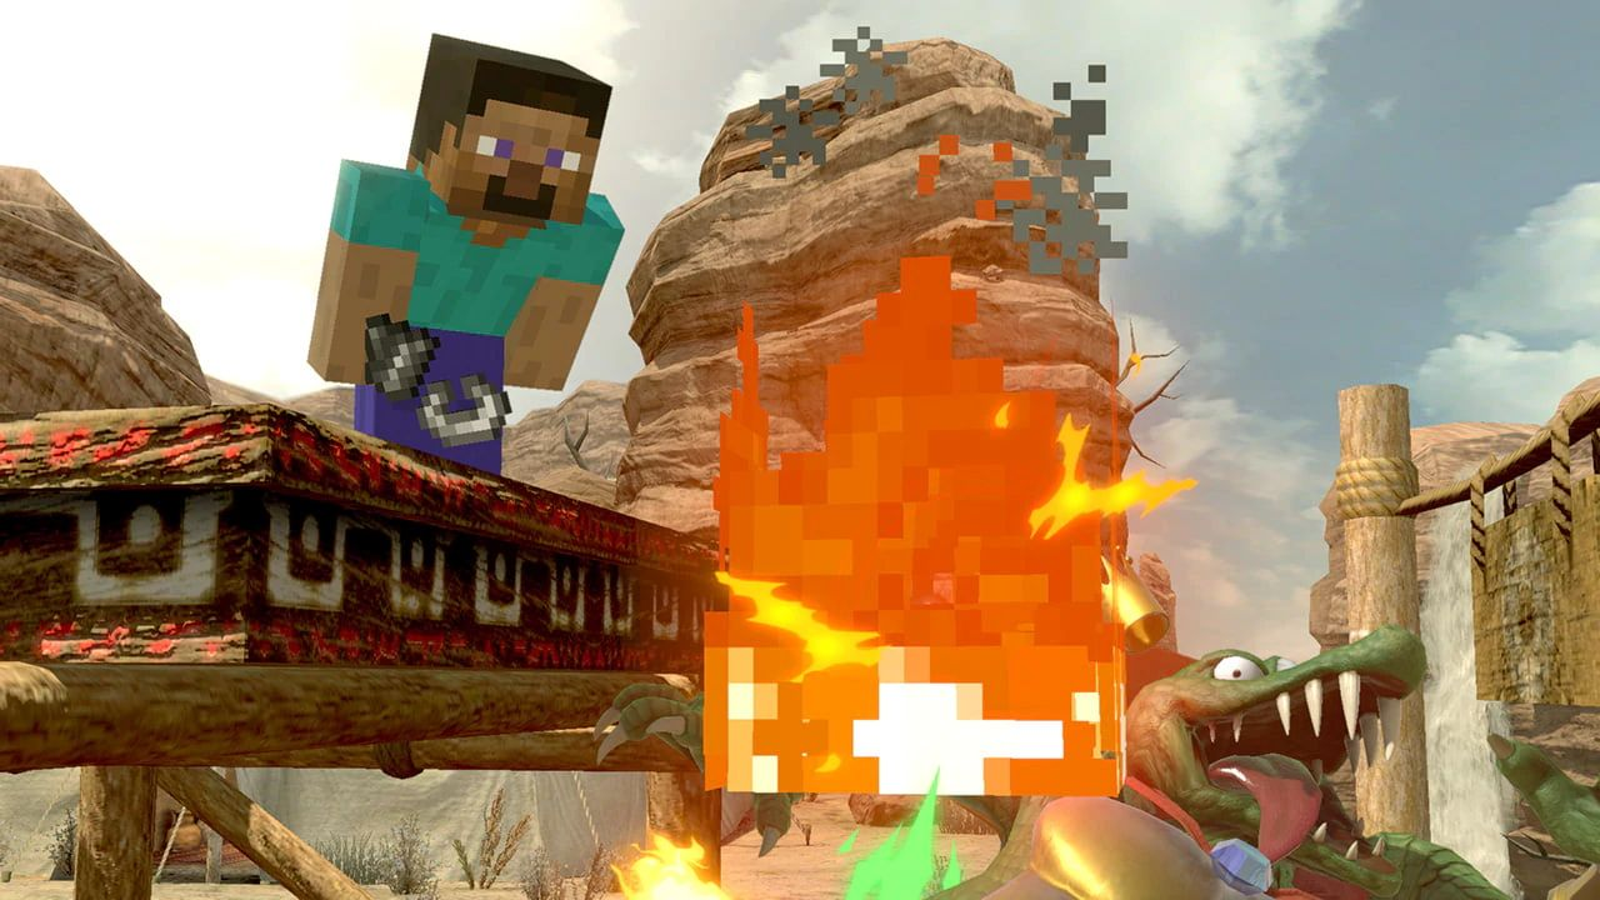 Minecraft New Year Celebration: Get free skins and maps every day this  month - Video Games on Sports Illustrated